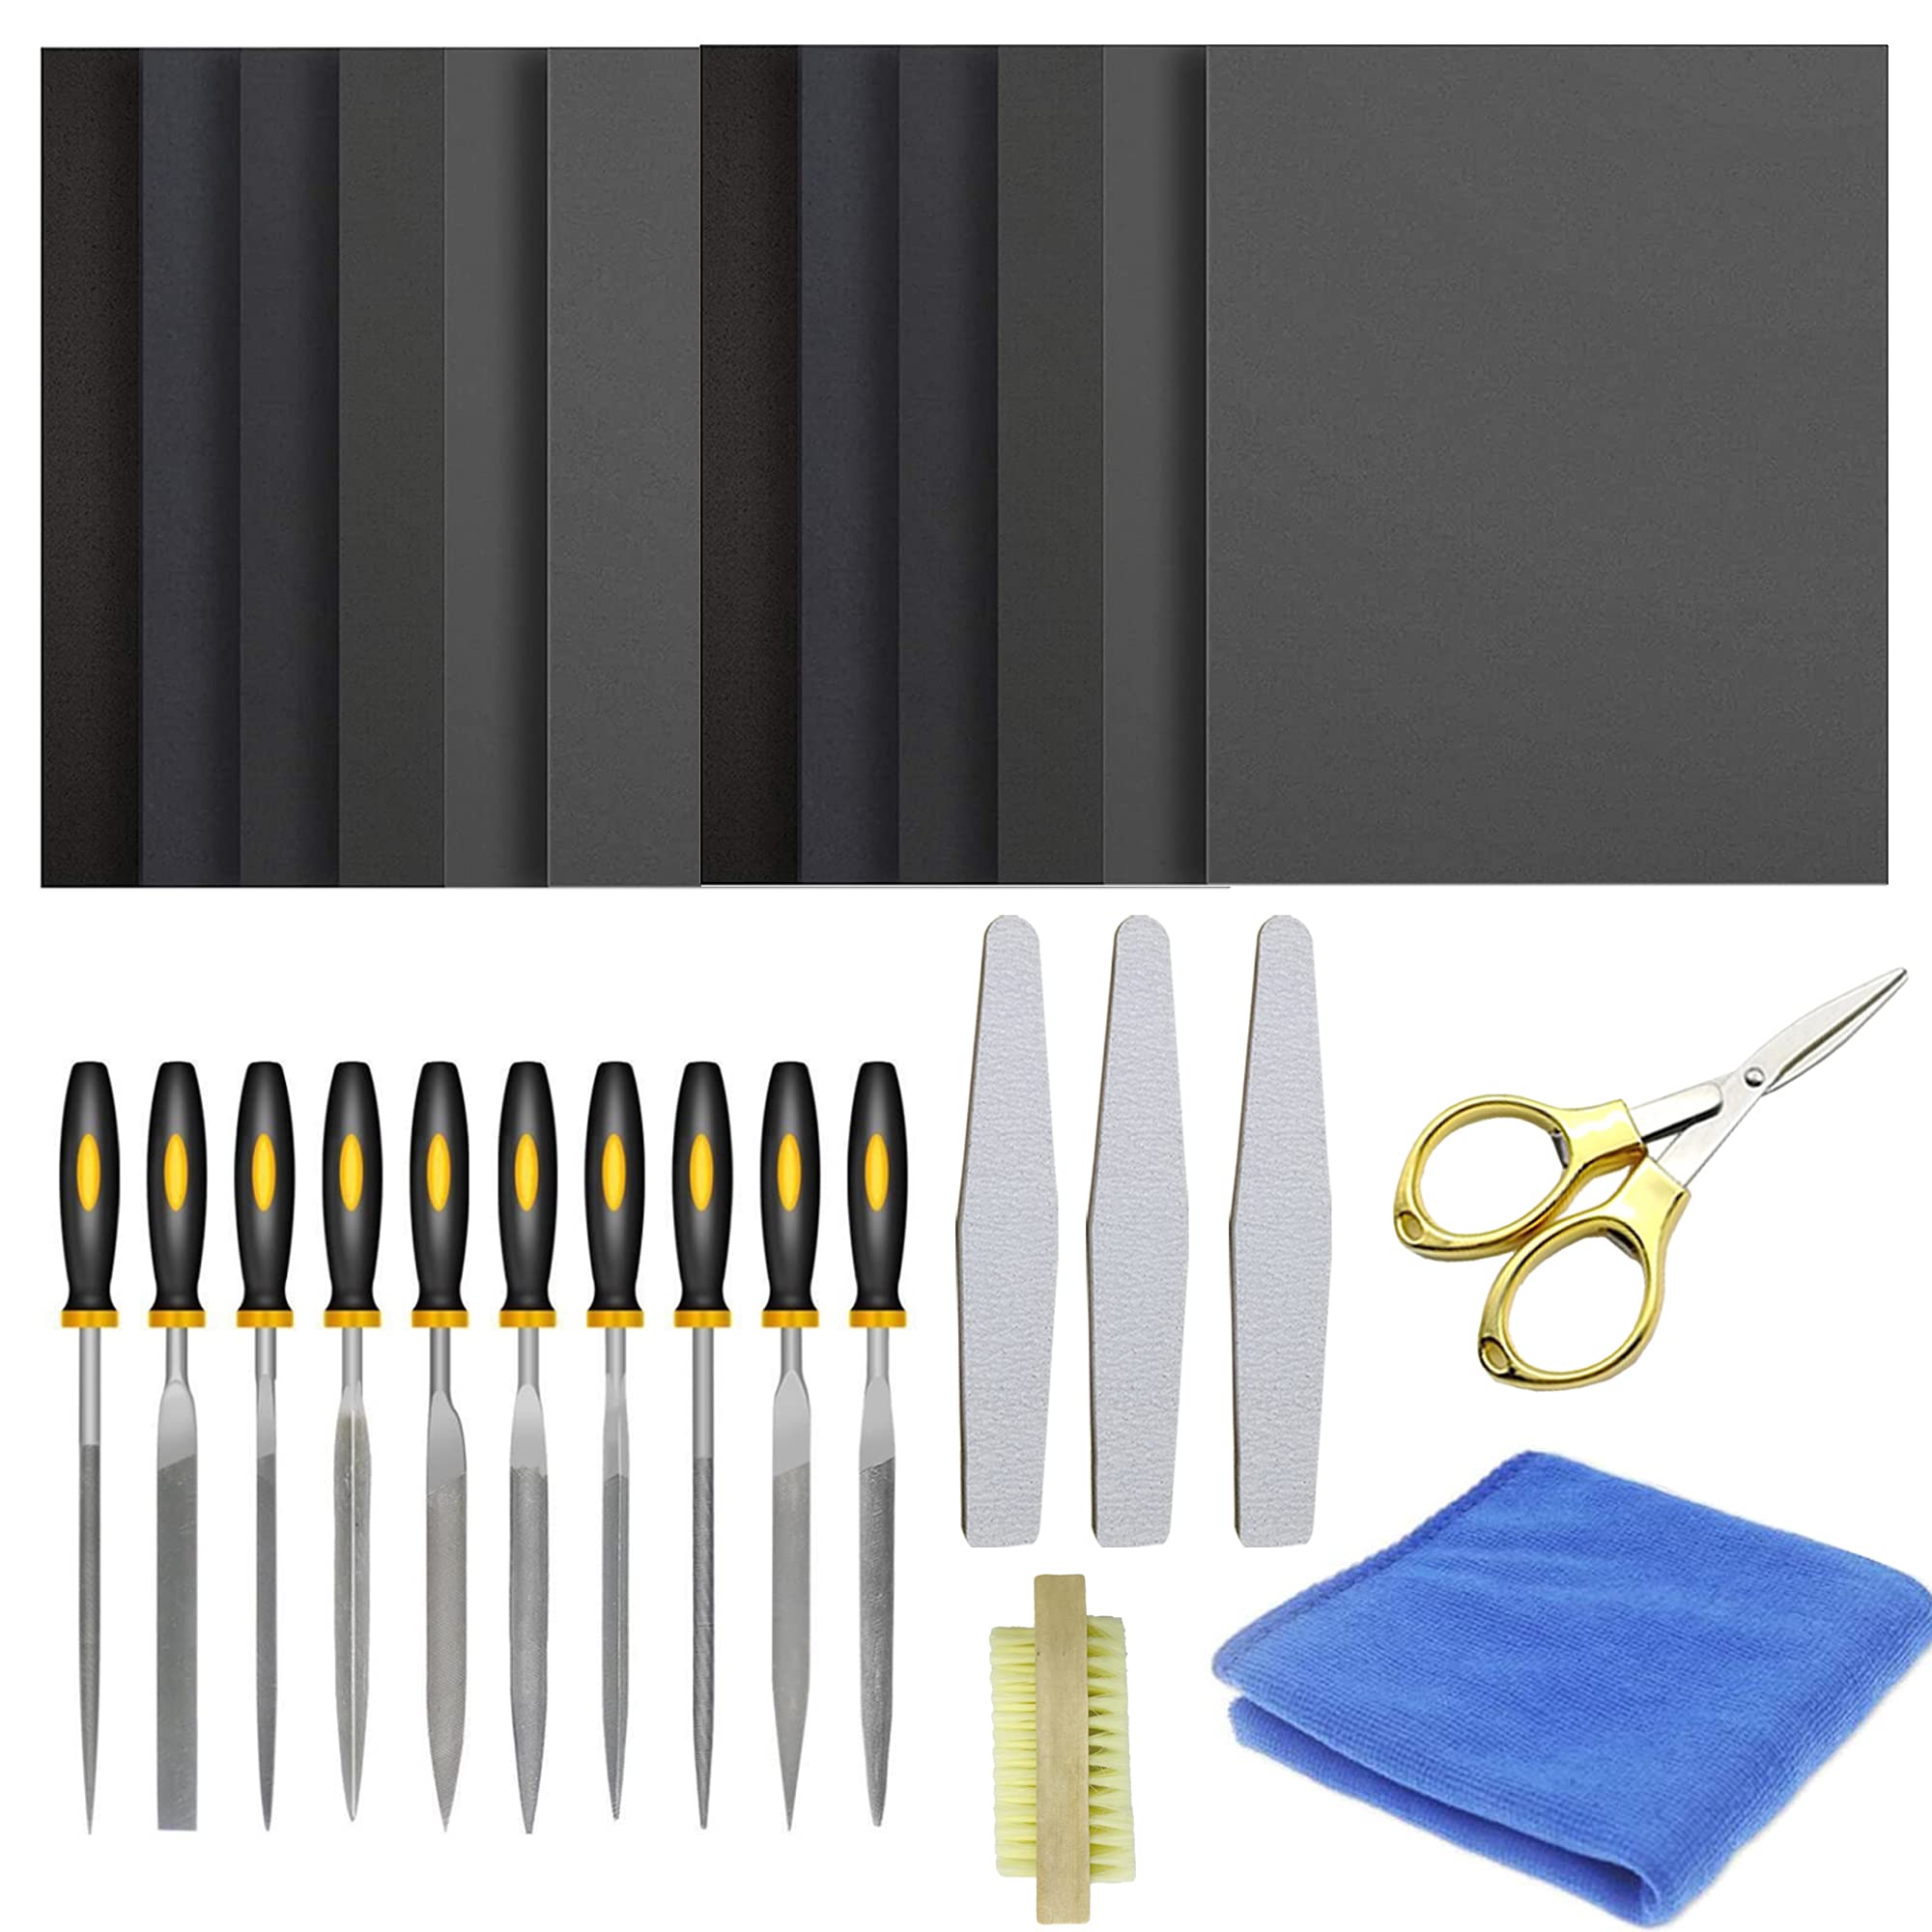 Allazone 19 PCS Resin Casting Tools Resin Sanding and Polishing Kit Include  10 Style File, Sand